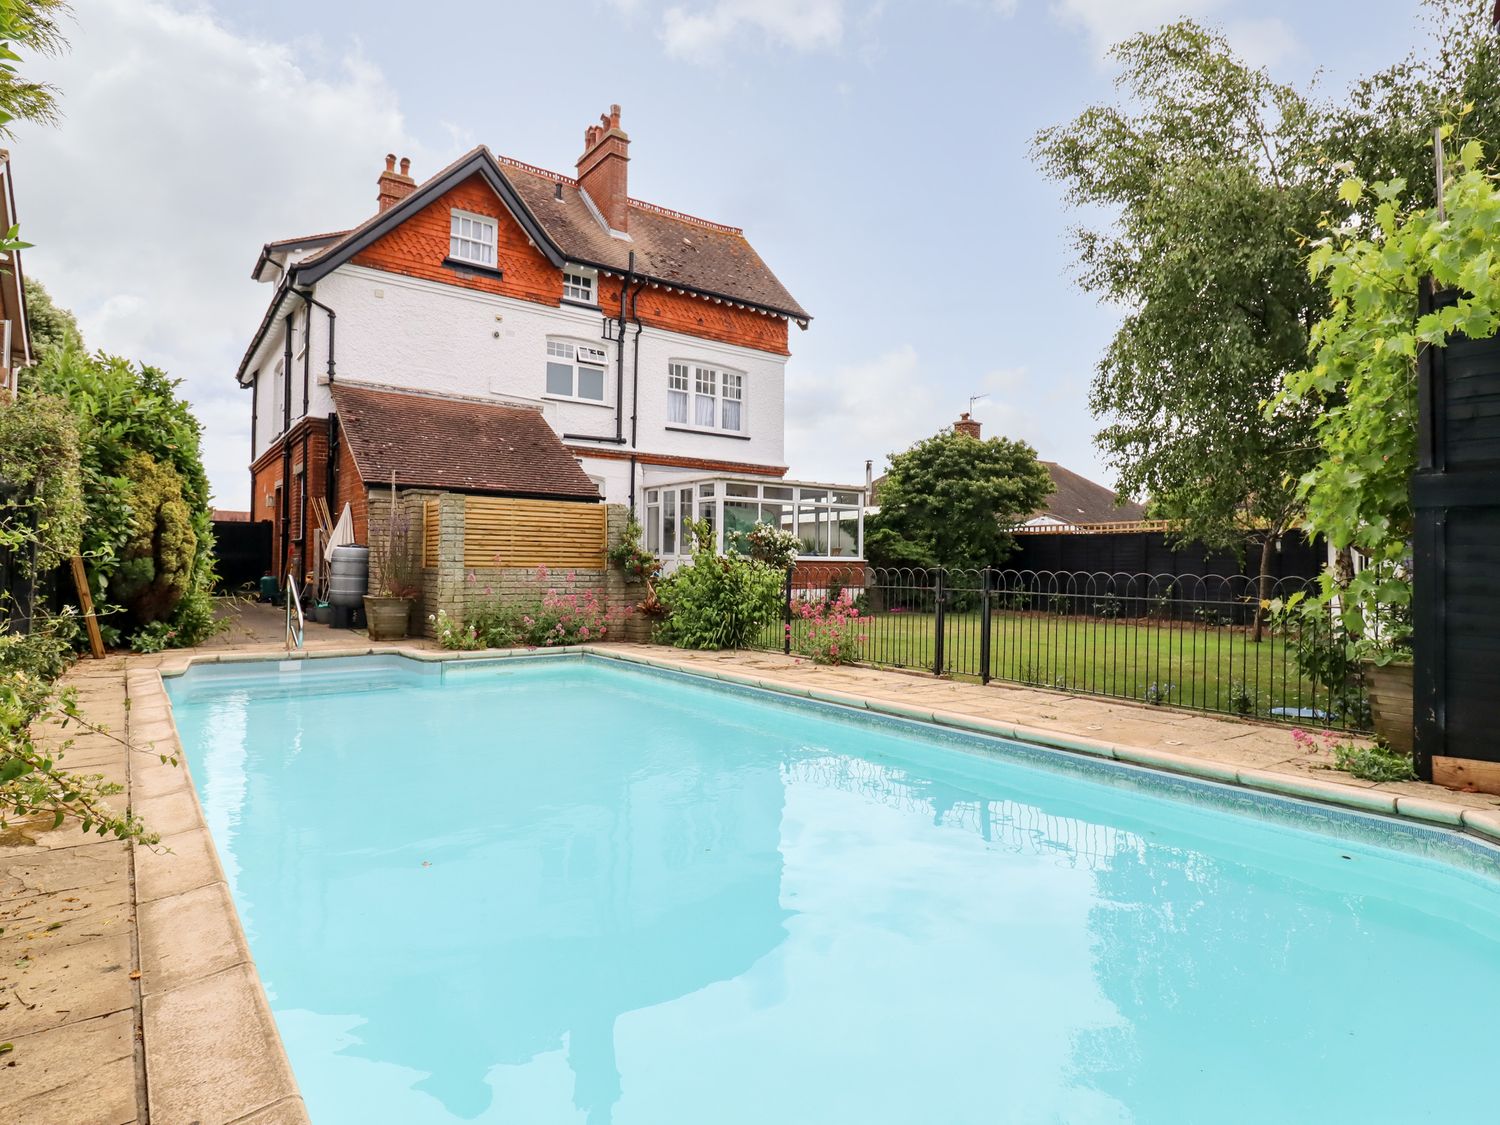 16 Garfield Road, Felixstowe, Suffolk. Swimming pool. Close to shop, pub and beach. Off-road parking